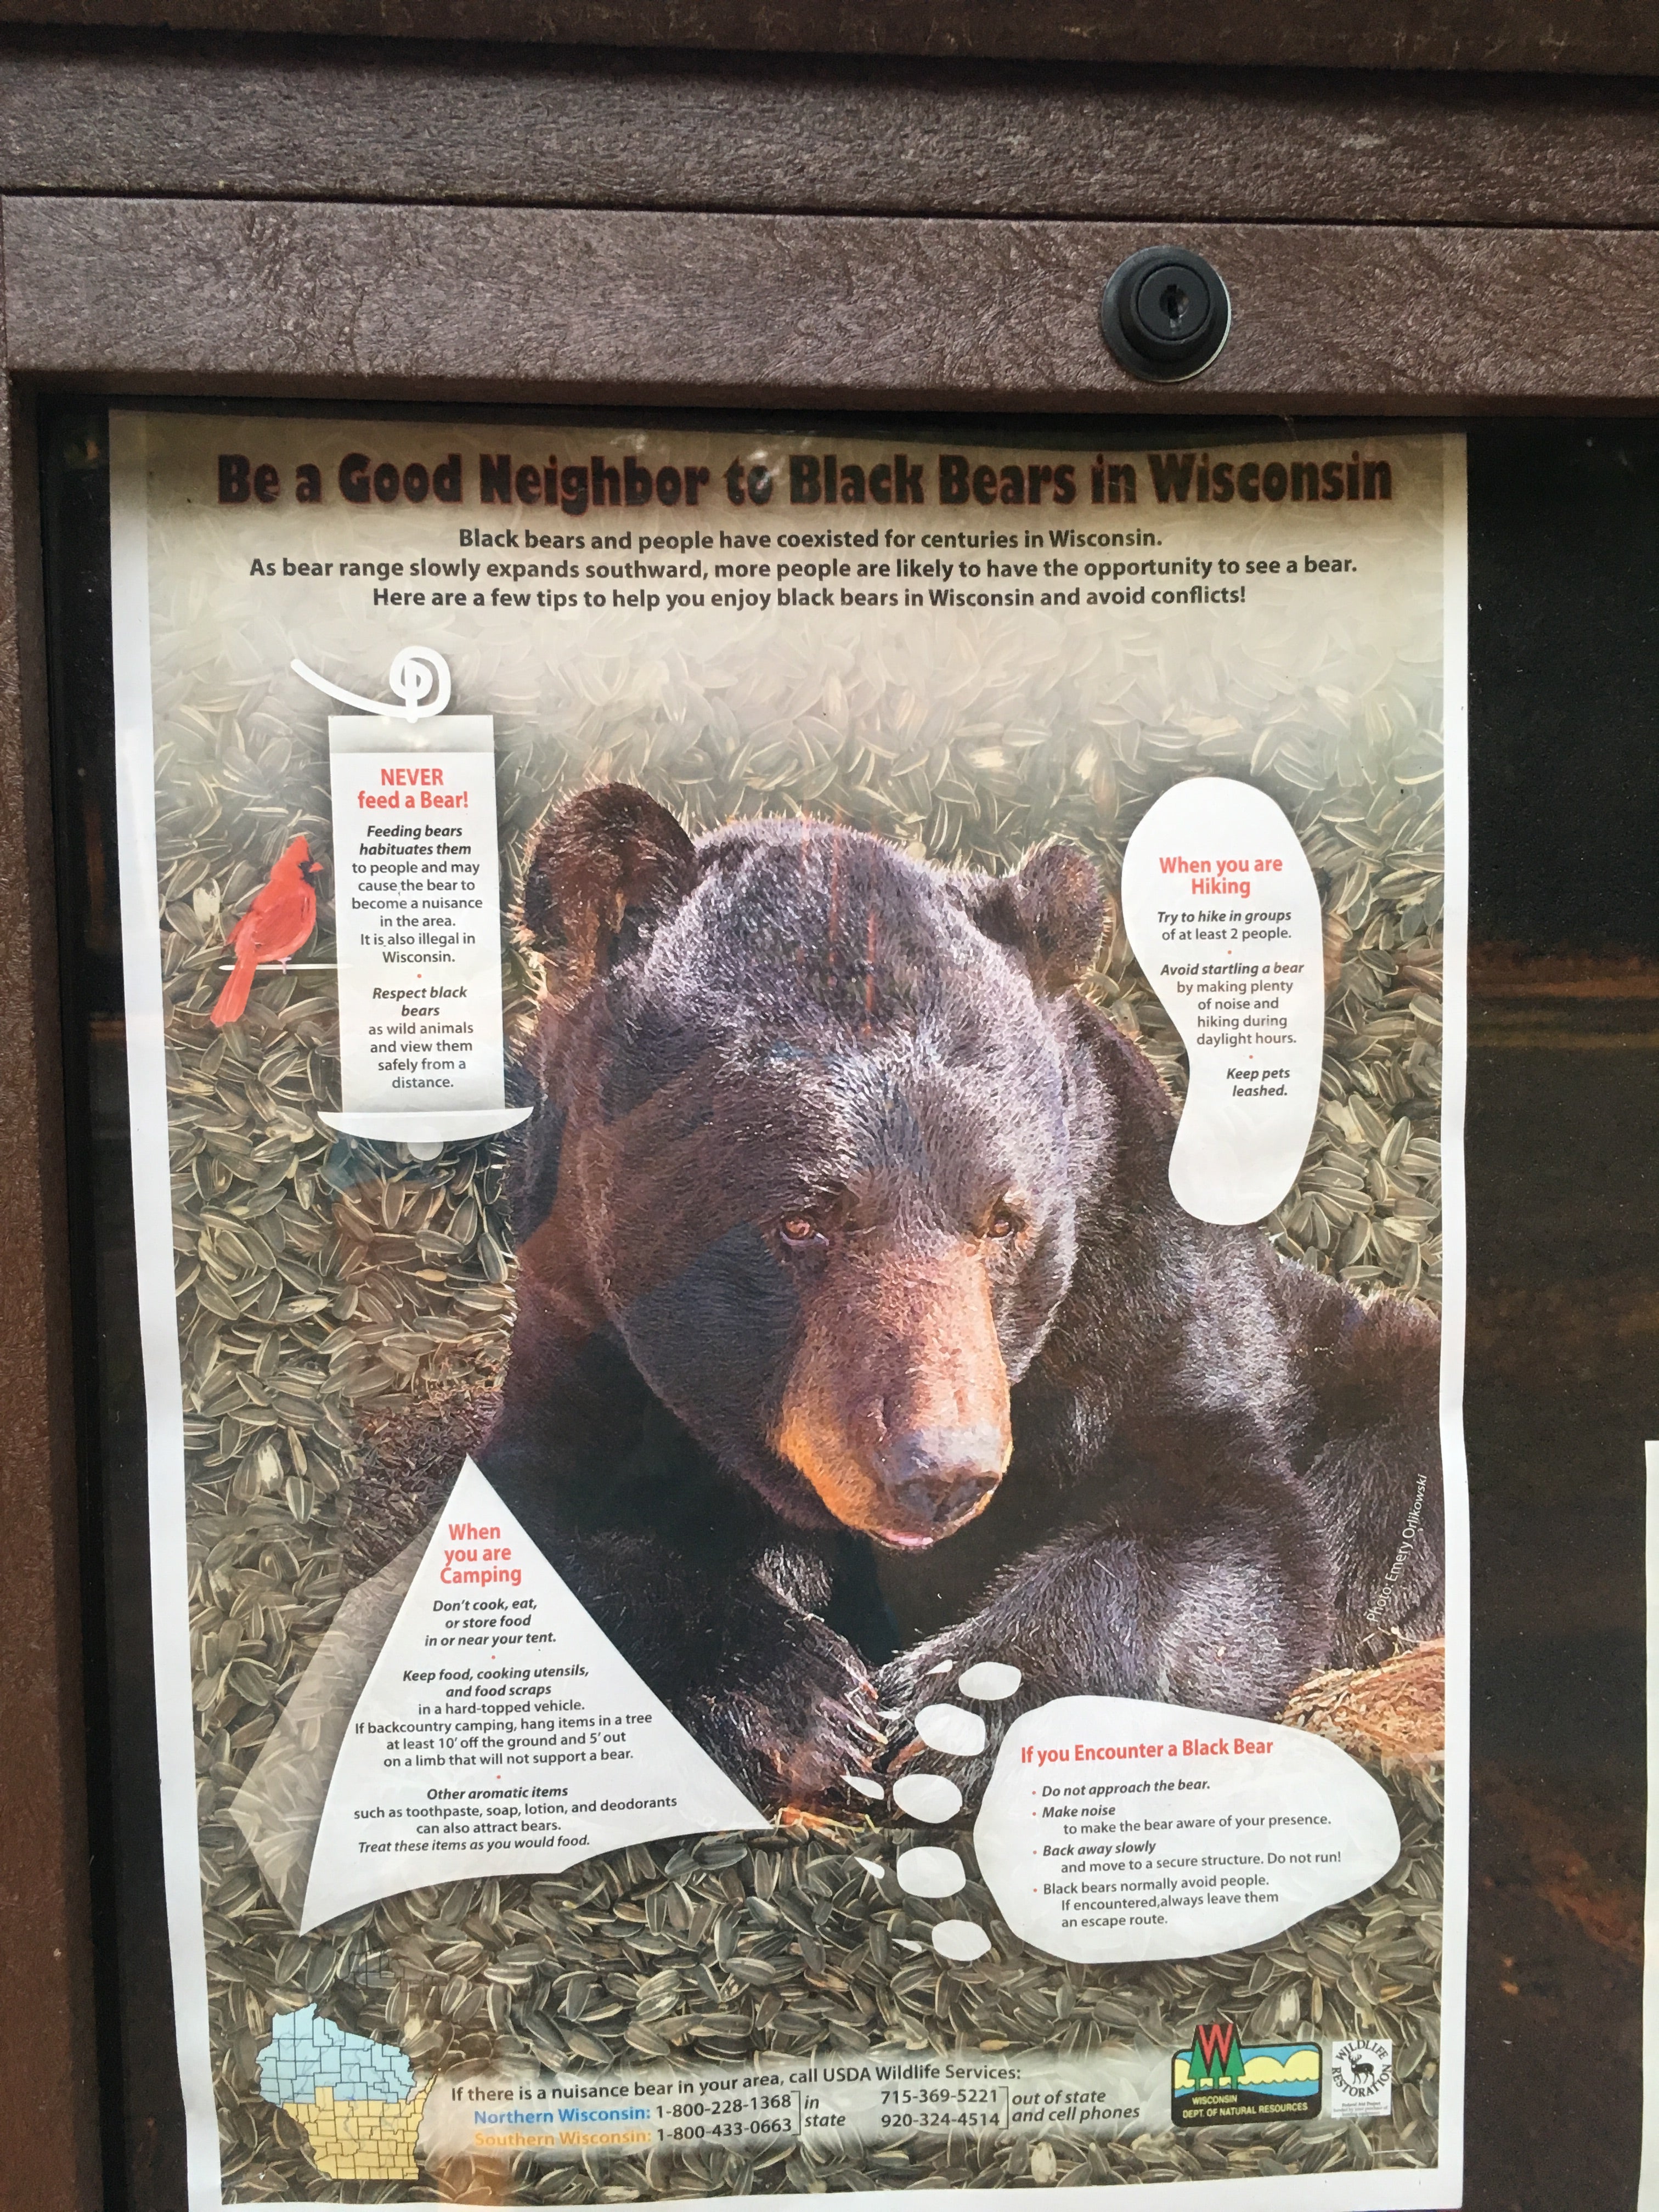 A little education. But no bear boxes in the campground. Hmmm.